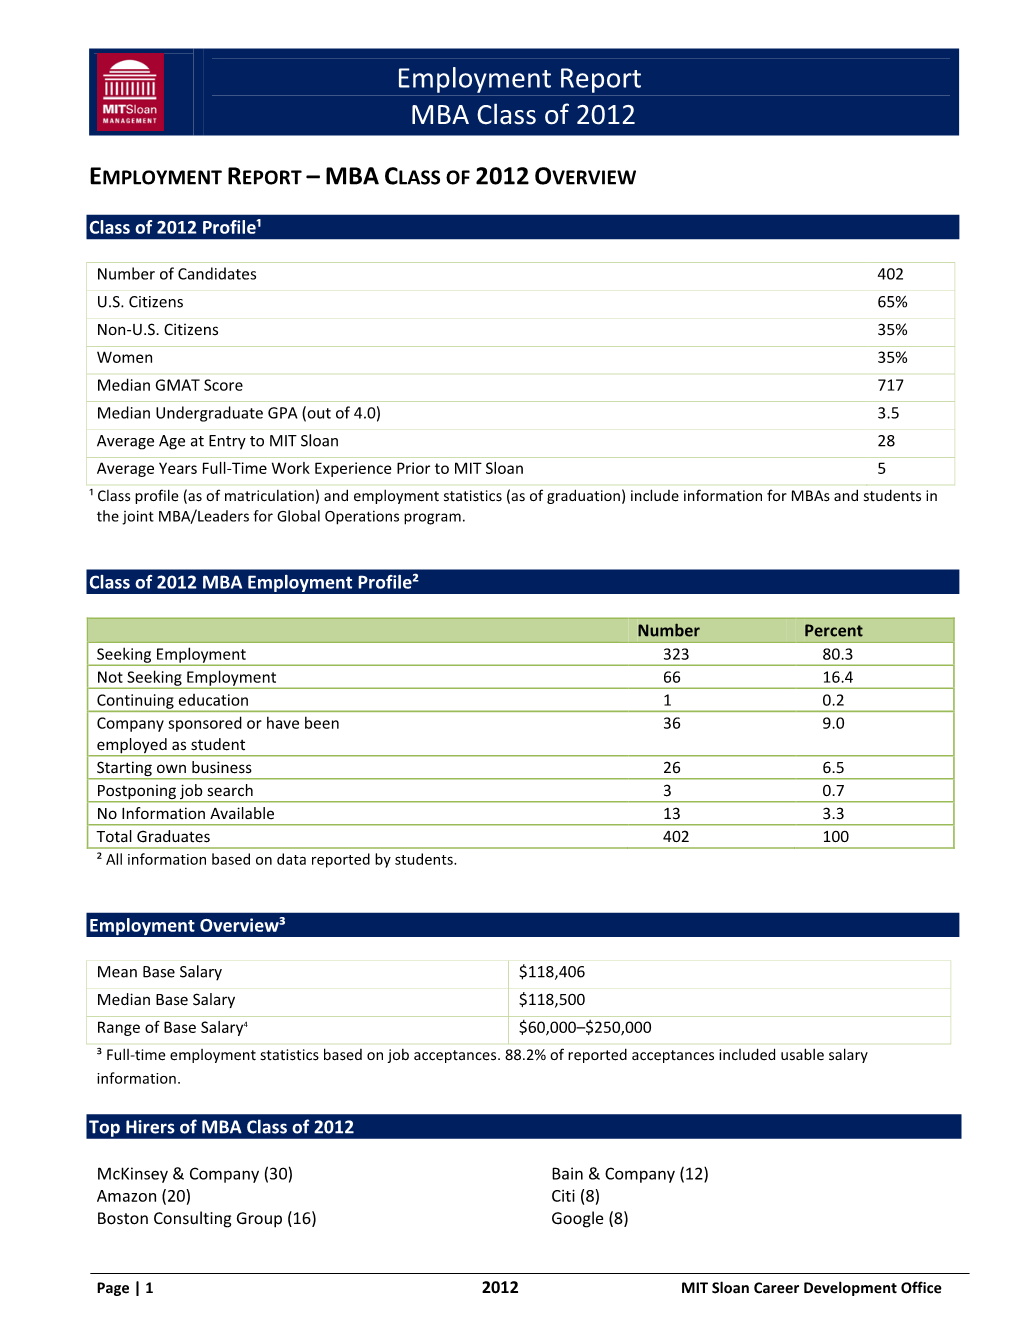 Employment Report MBA Class of 2012